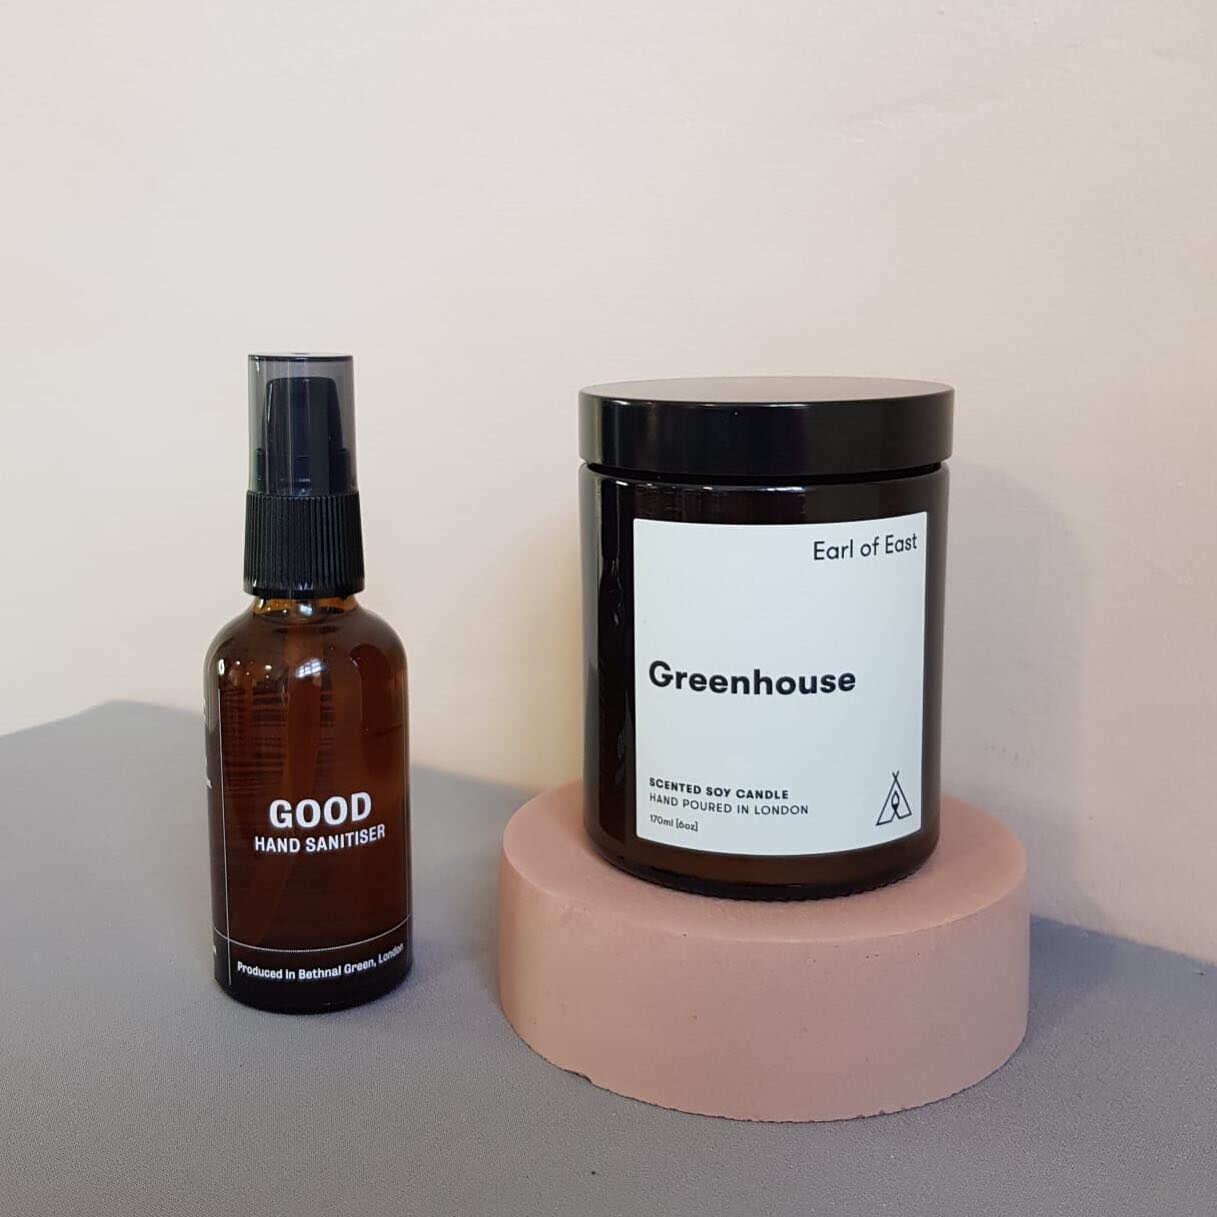 @good_botanics natural hand sanitizer containing lavender &amp; tree tree essential oil .
50 ml 70.5% natural alcohol.  @earlofeastlondon greenhouse inspired by their travels in Greece. Hand poured 

#shopatflint #earlifeastlondon #goodbotsnics #sust